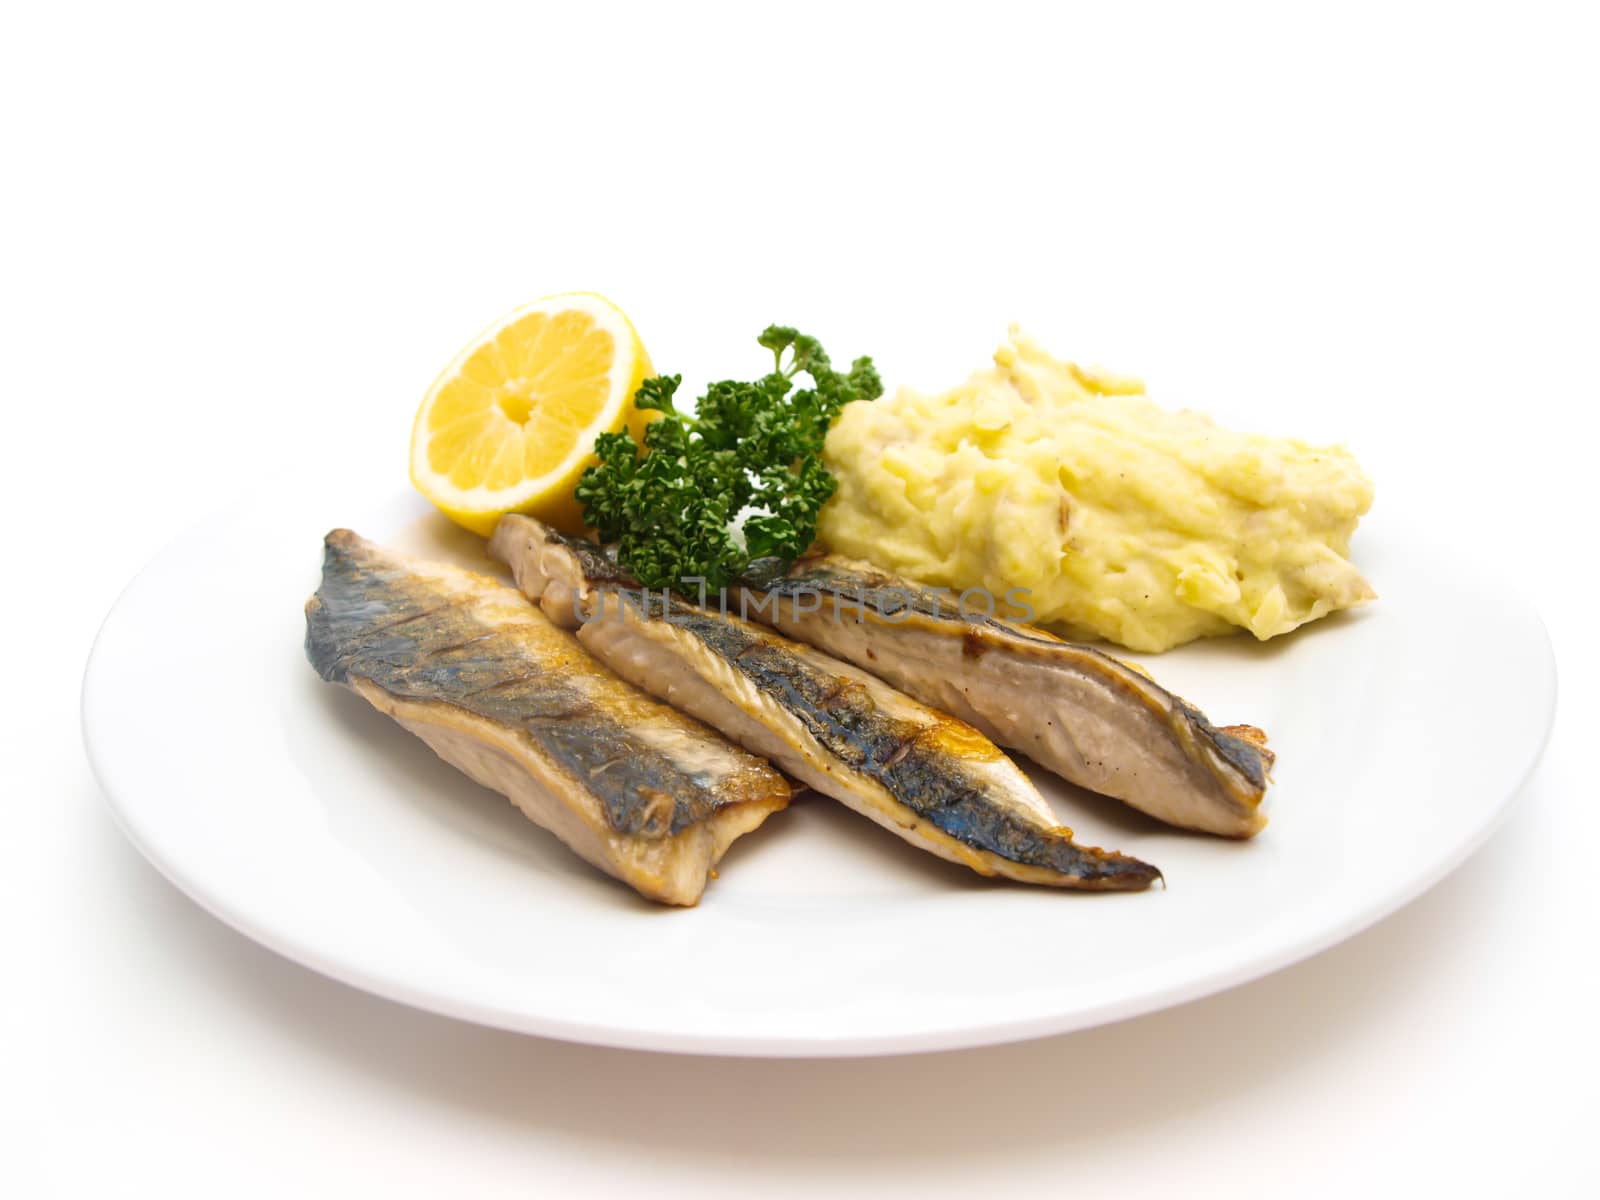 Fried mackerel on white plate with half lemon, green parsley and mashed potatoes